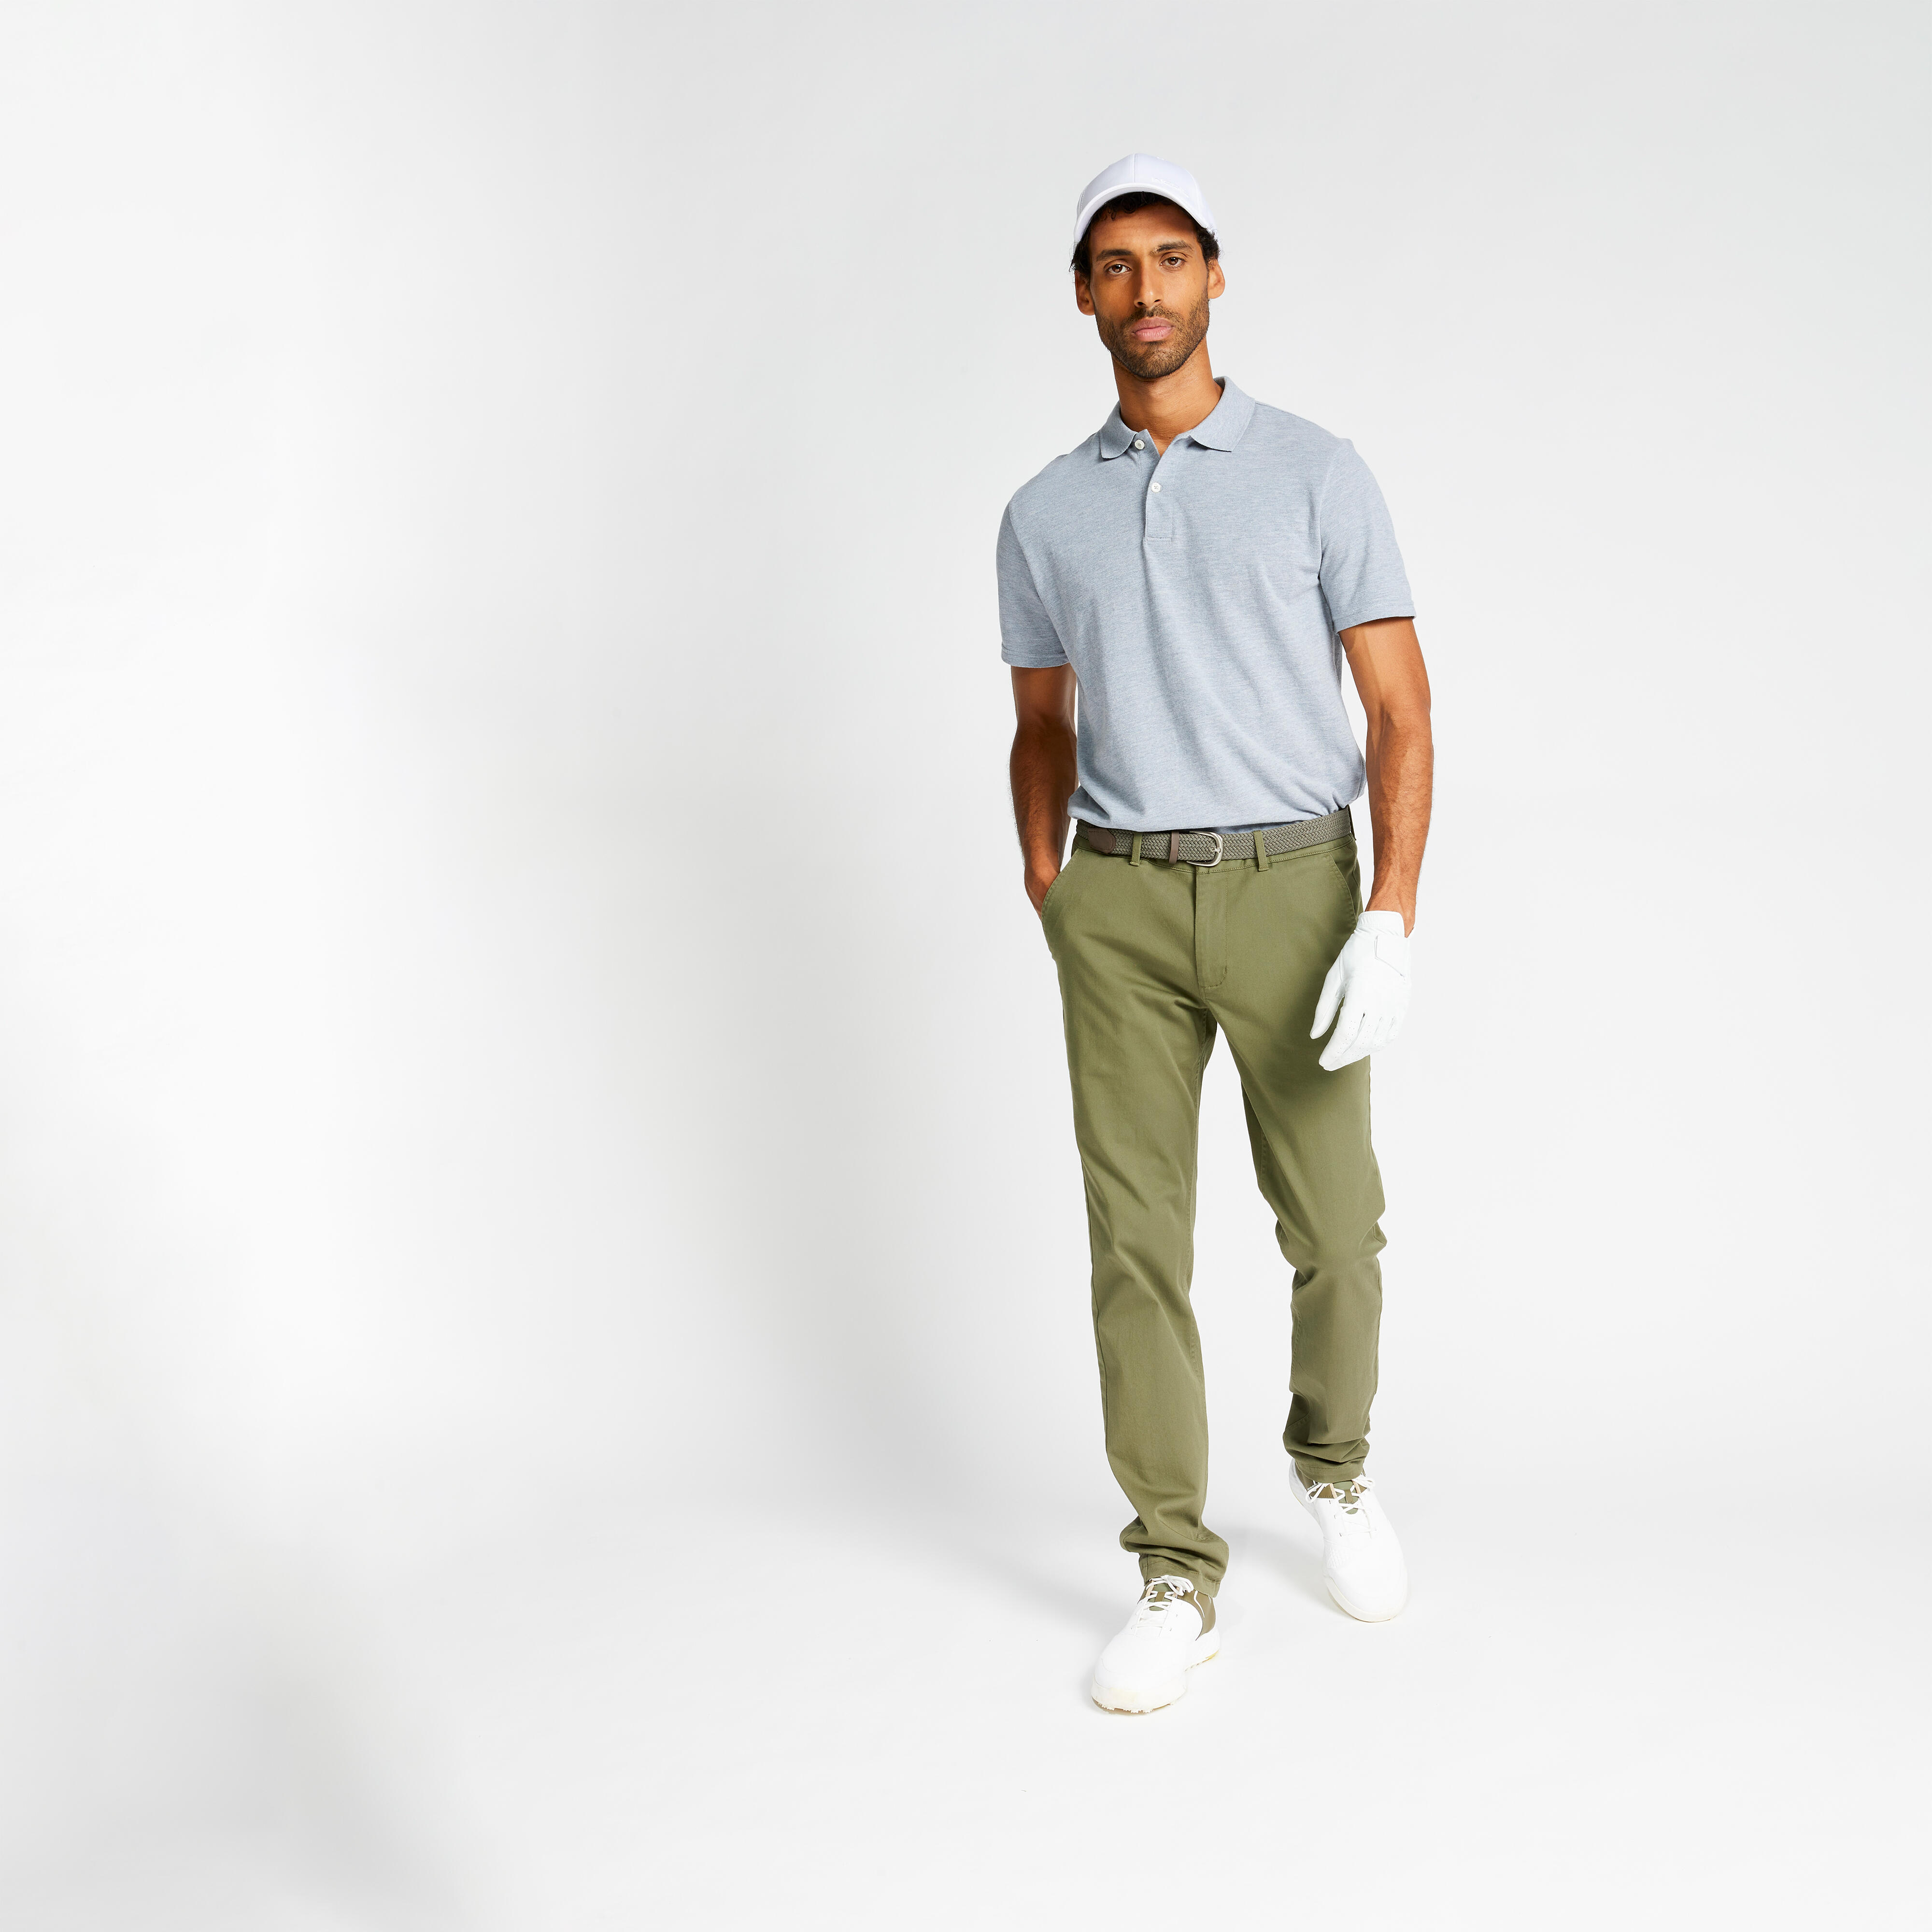 Buy Golf Trouser Online In India  Etsy India